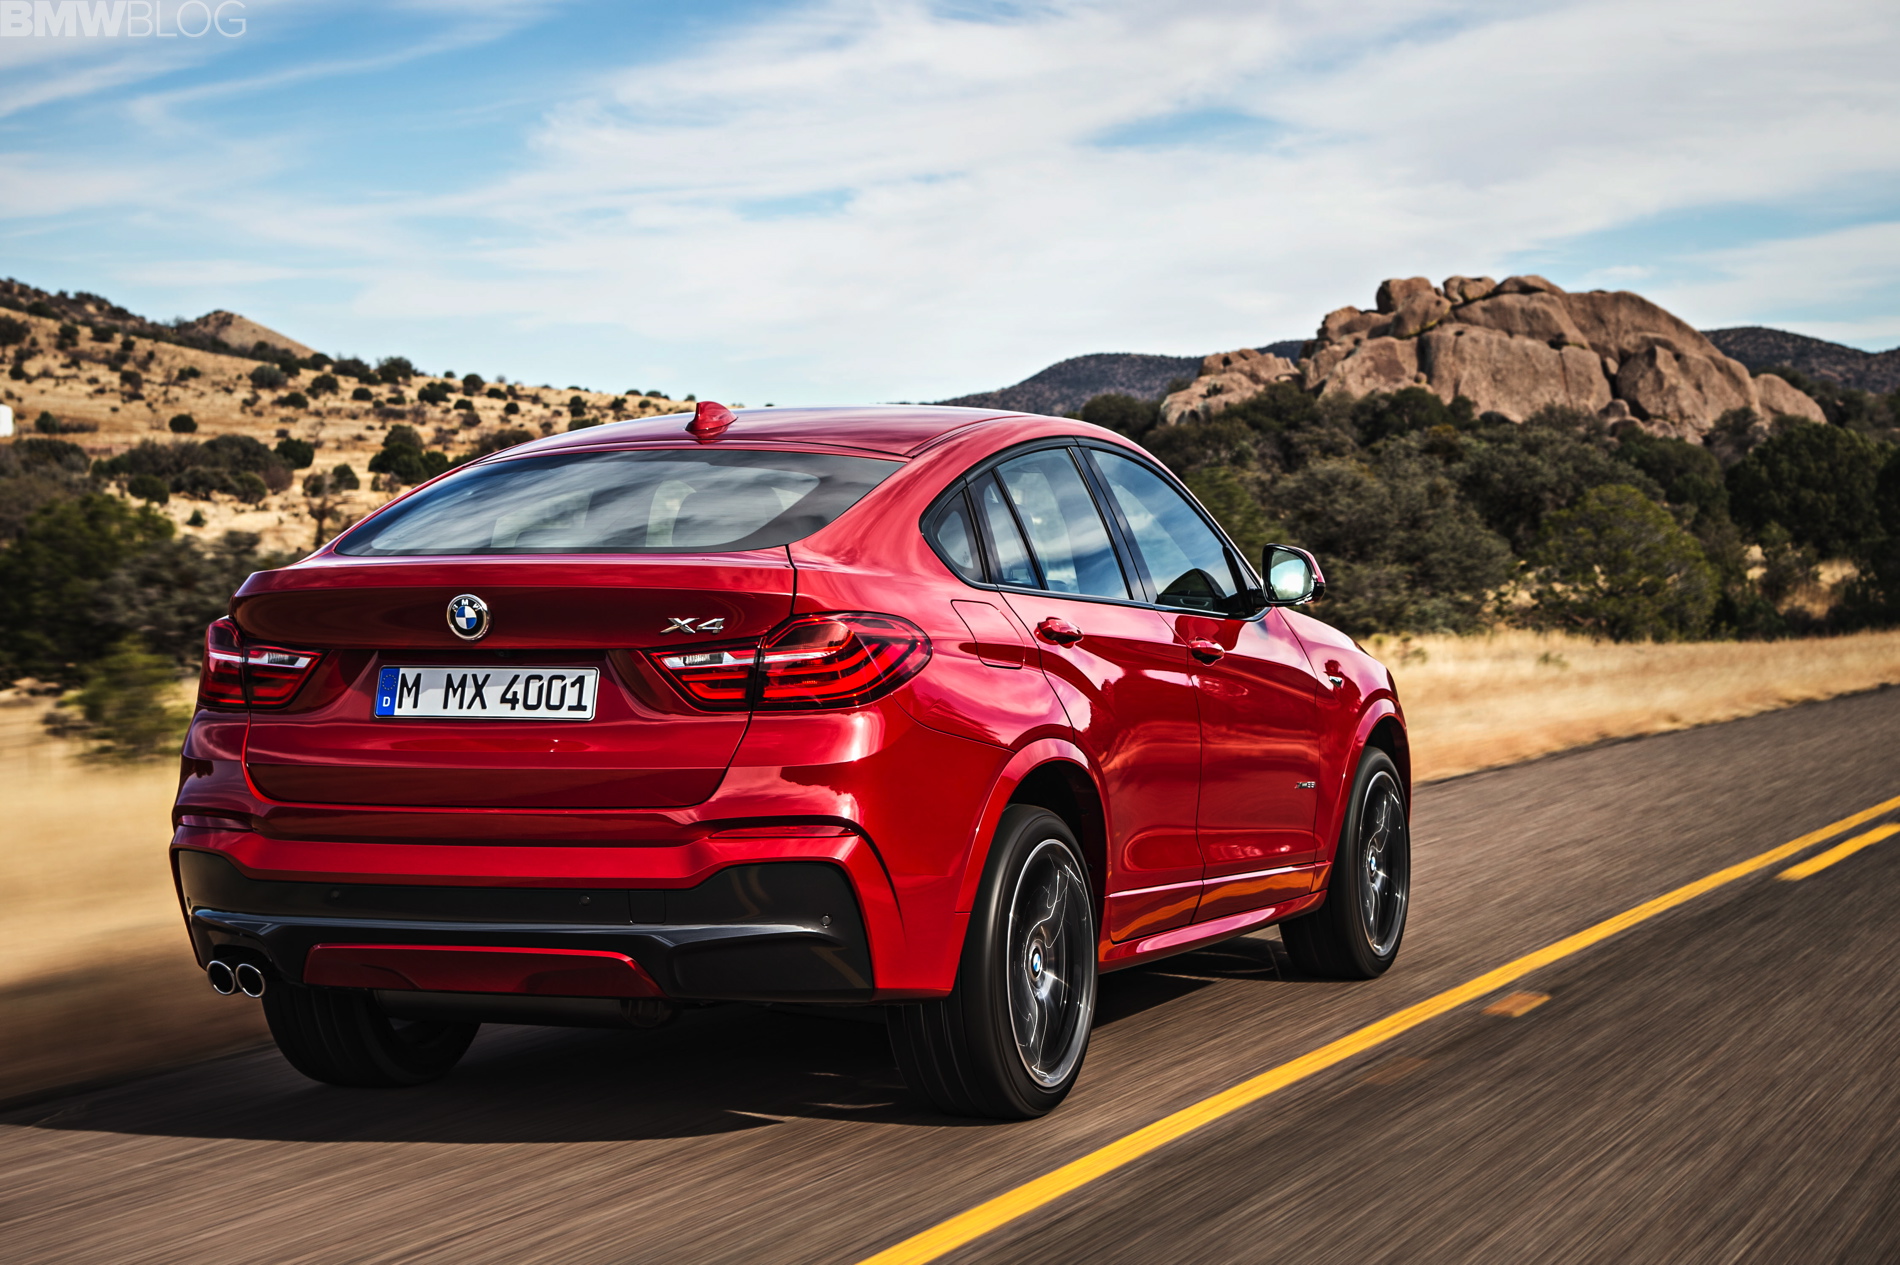 new bmw x4 images 55